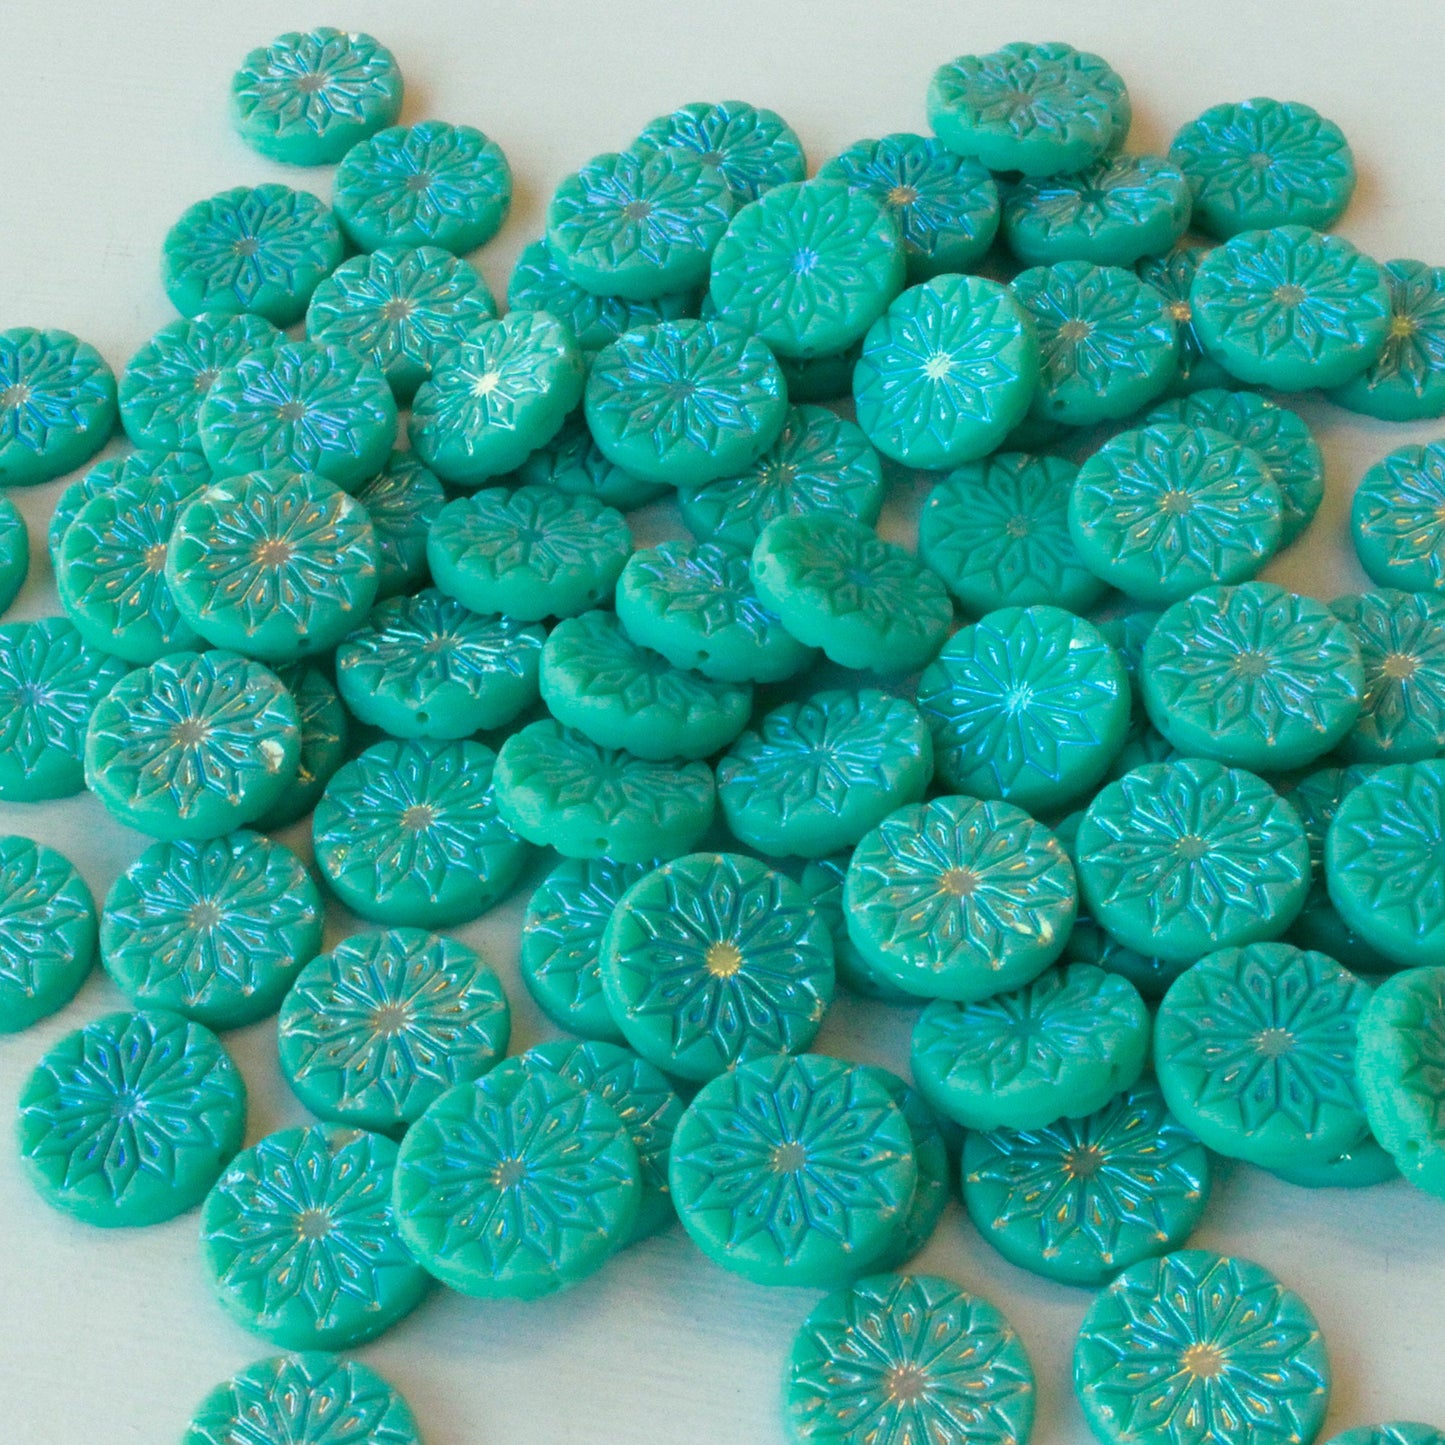 18mm Coin Flower Beads - Turquoise AB - 4 or 12 beads